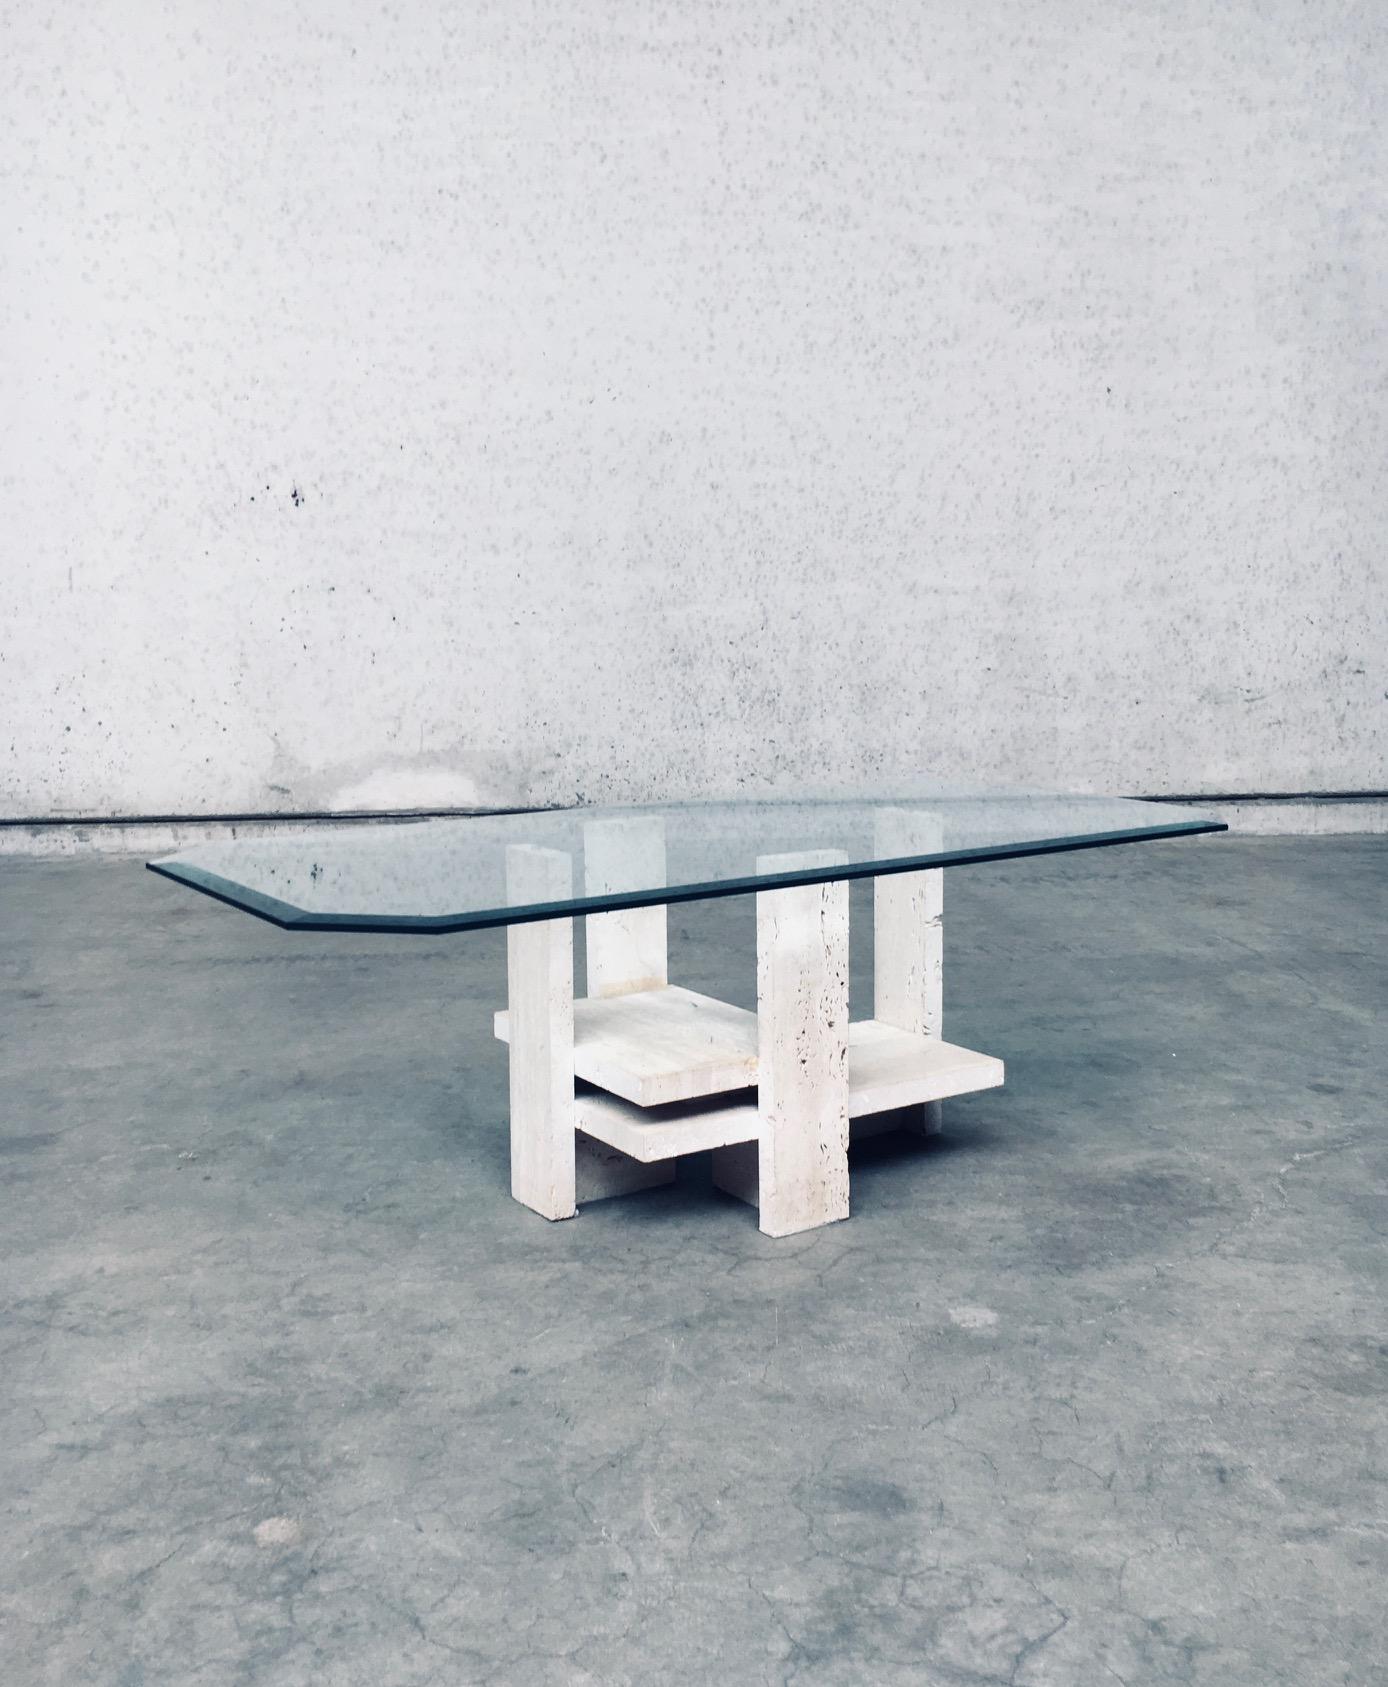 Glass Brutalist Design Travertine Coffee Table by Willy Ballez, Belgium 1970's For Sale